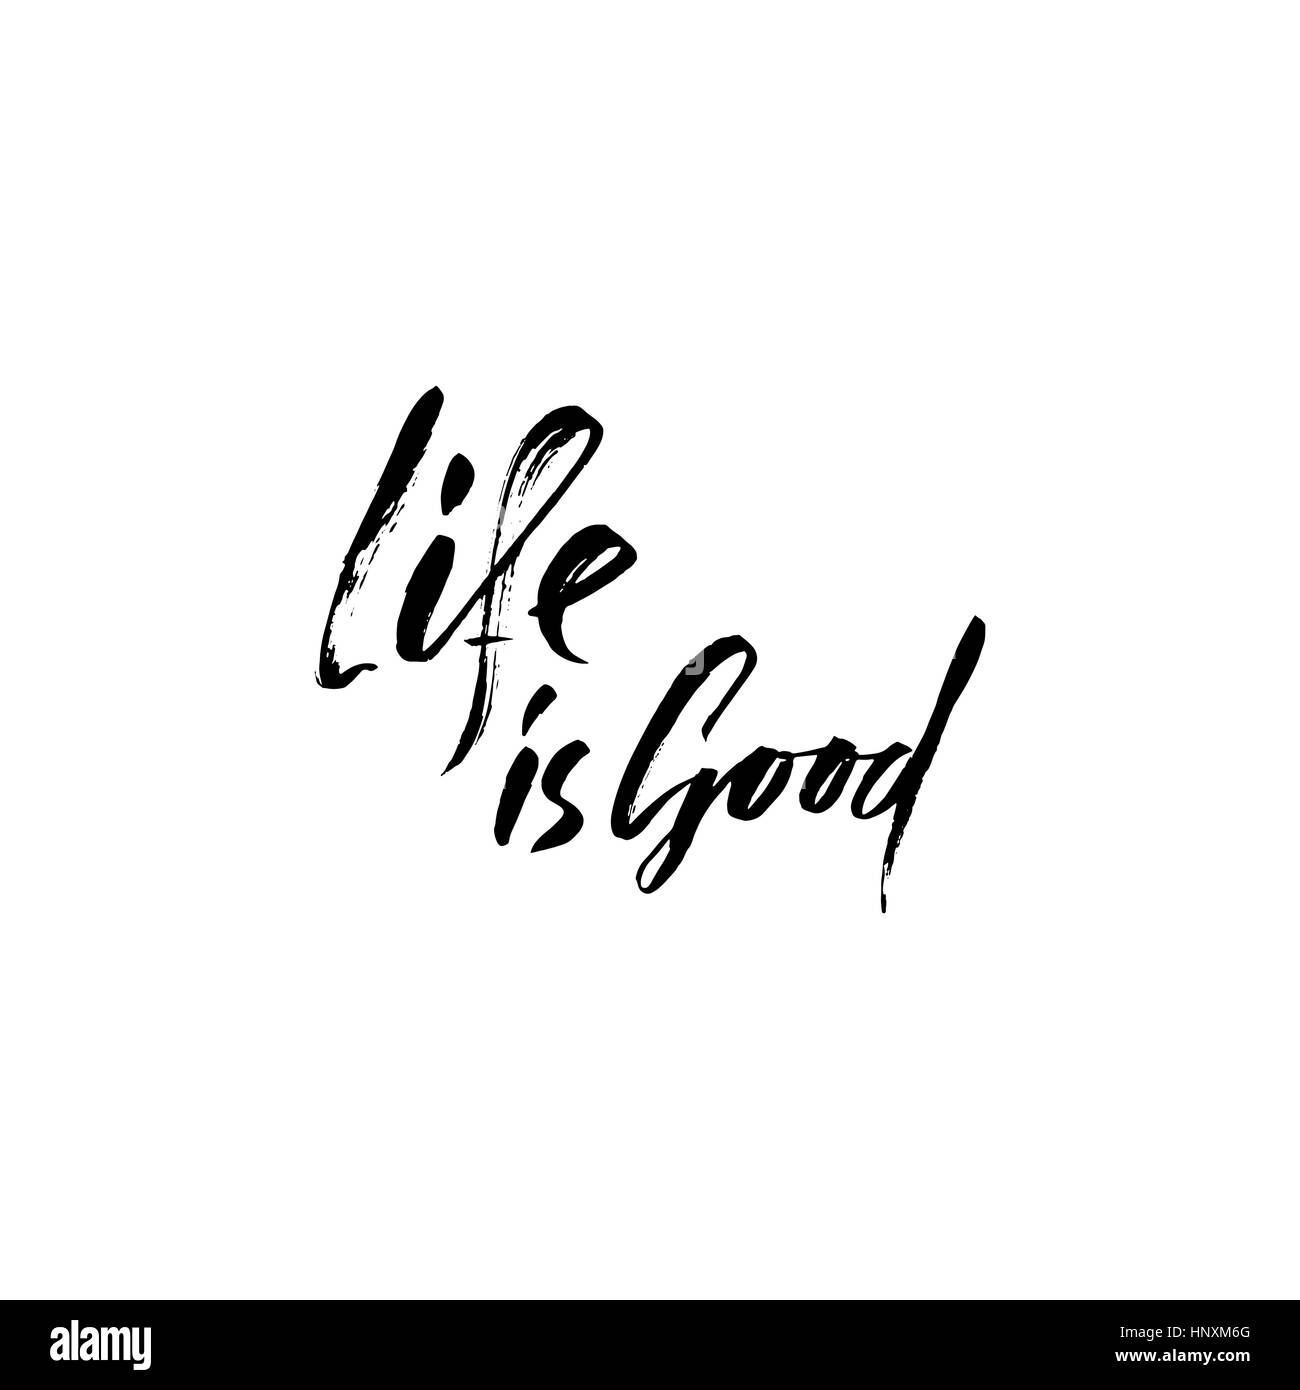 Hand drawn vector lettering. Motivating modern calligraphy. Inspiring hand lettered quote. Home decoration. Printabale phrase. Life is good. Stock Vector